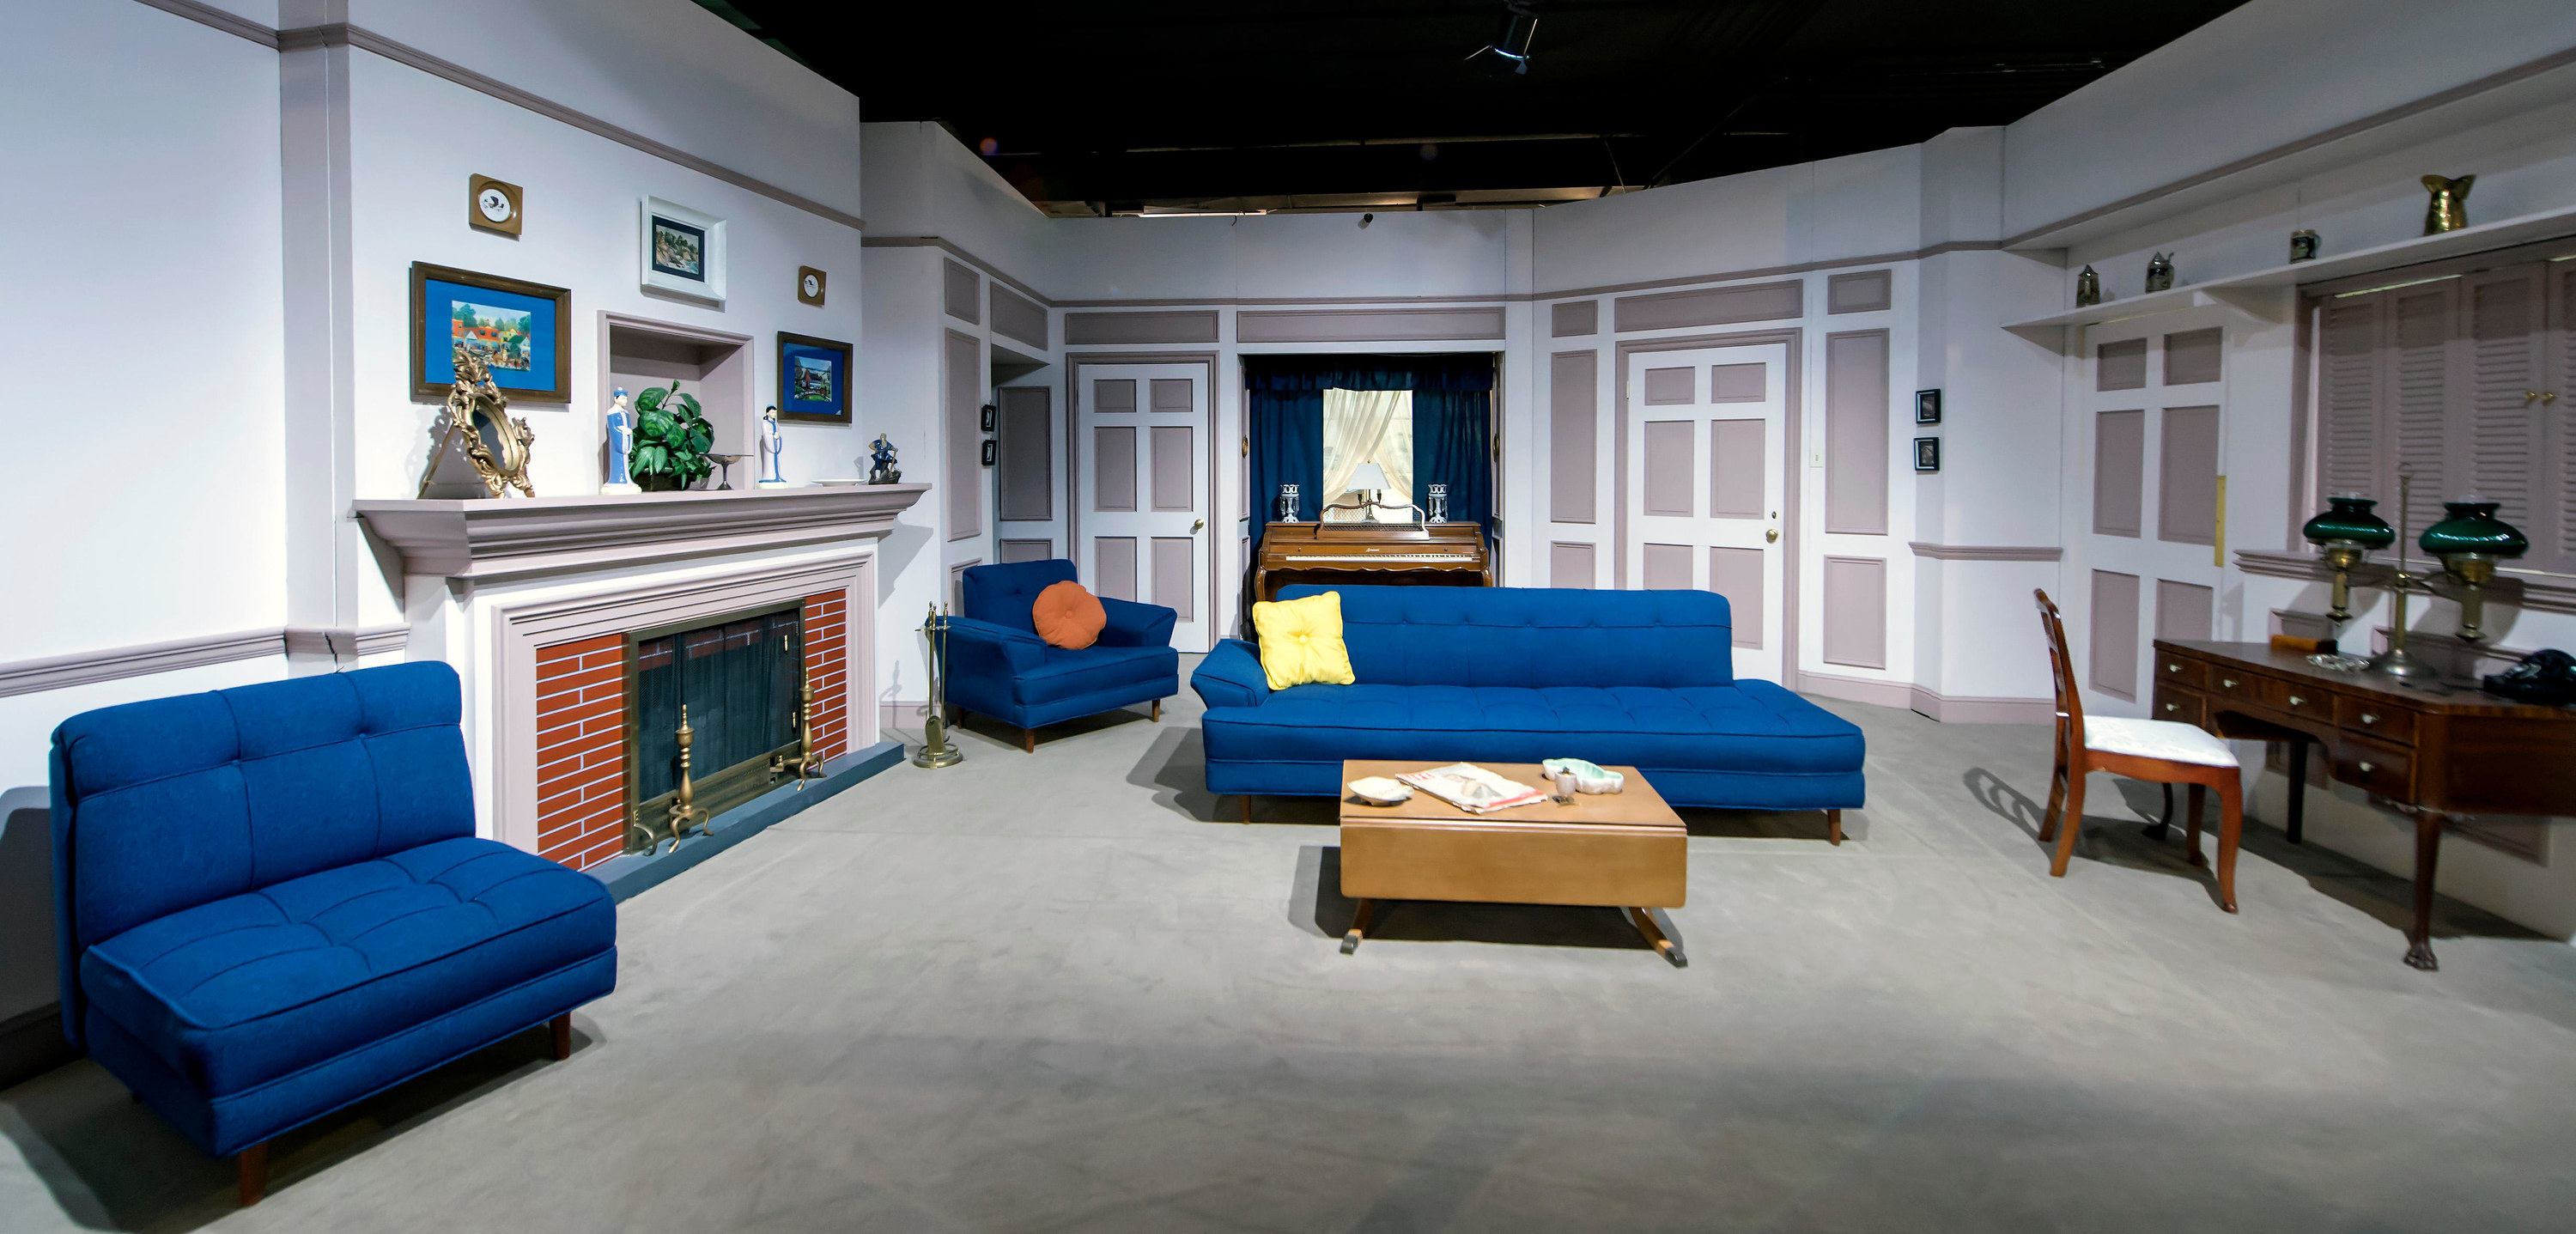 The I Love Lucy set with blue couch and seats